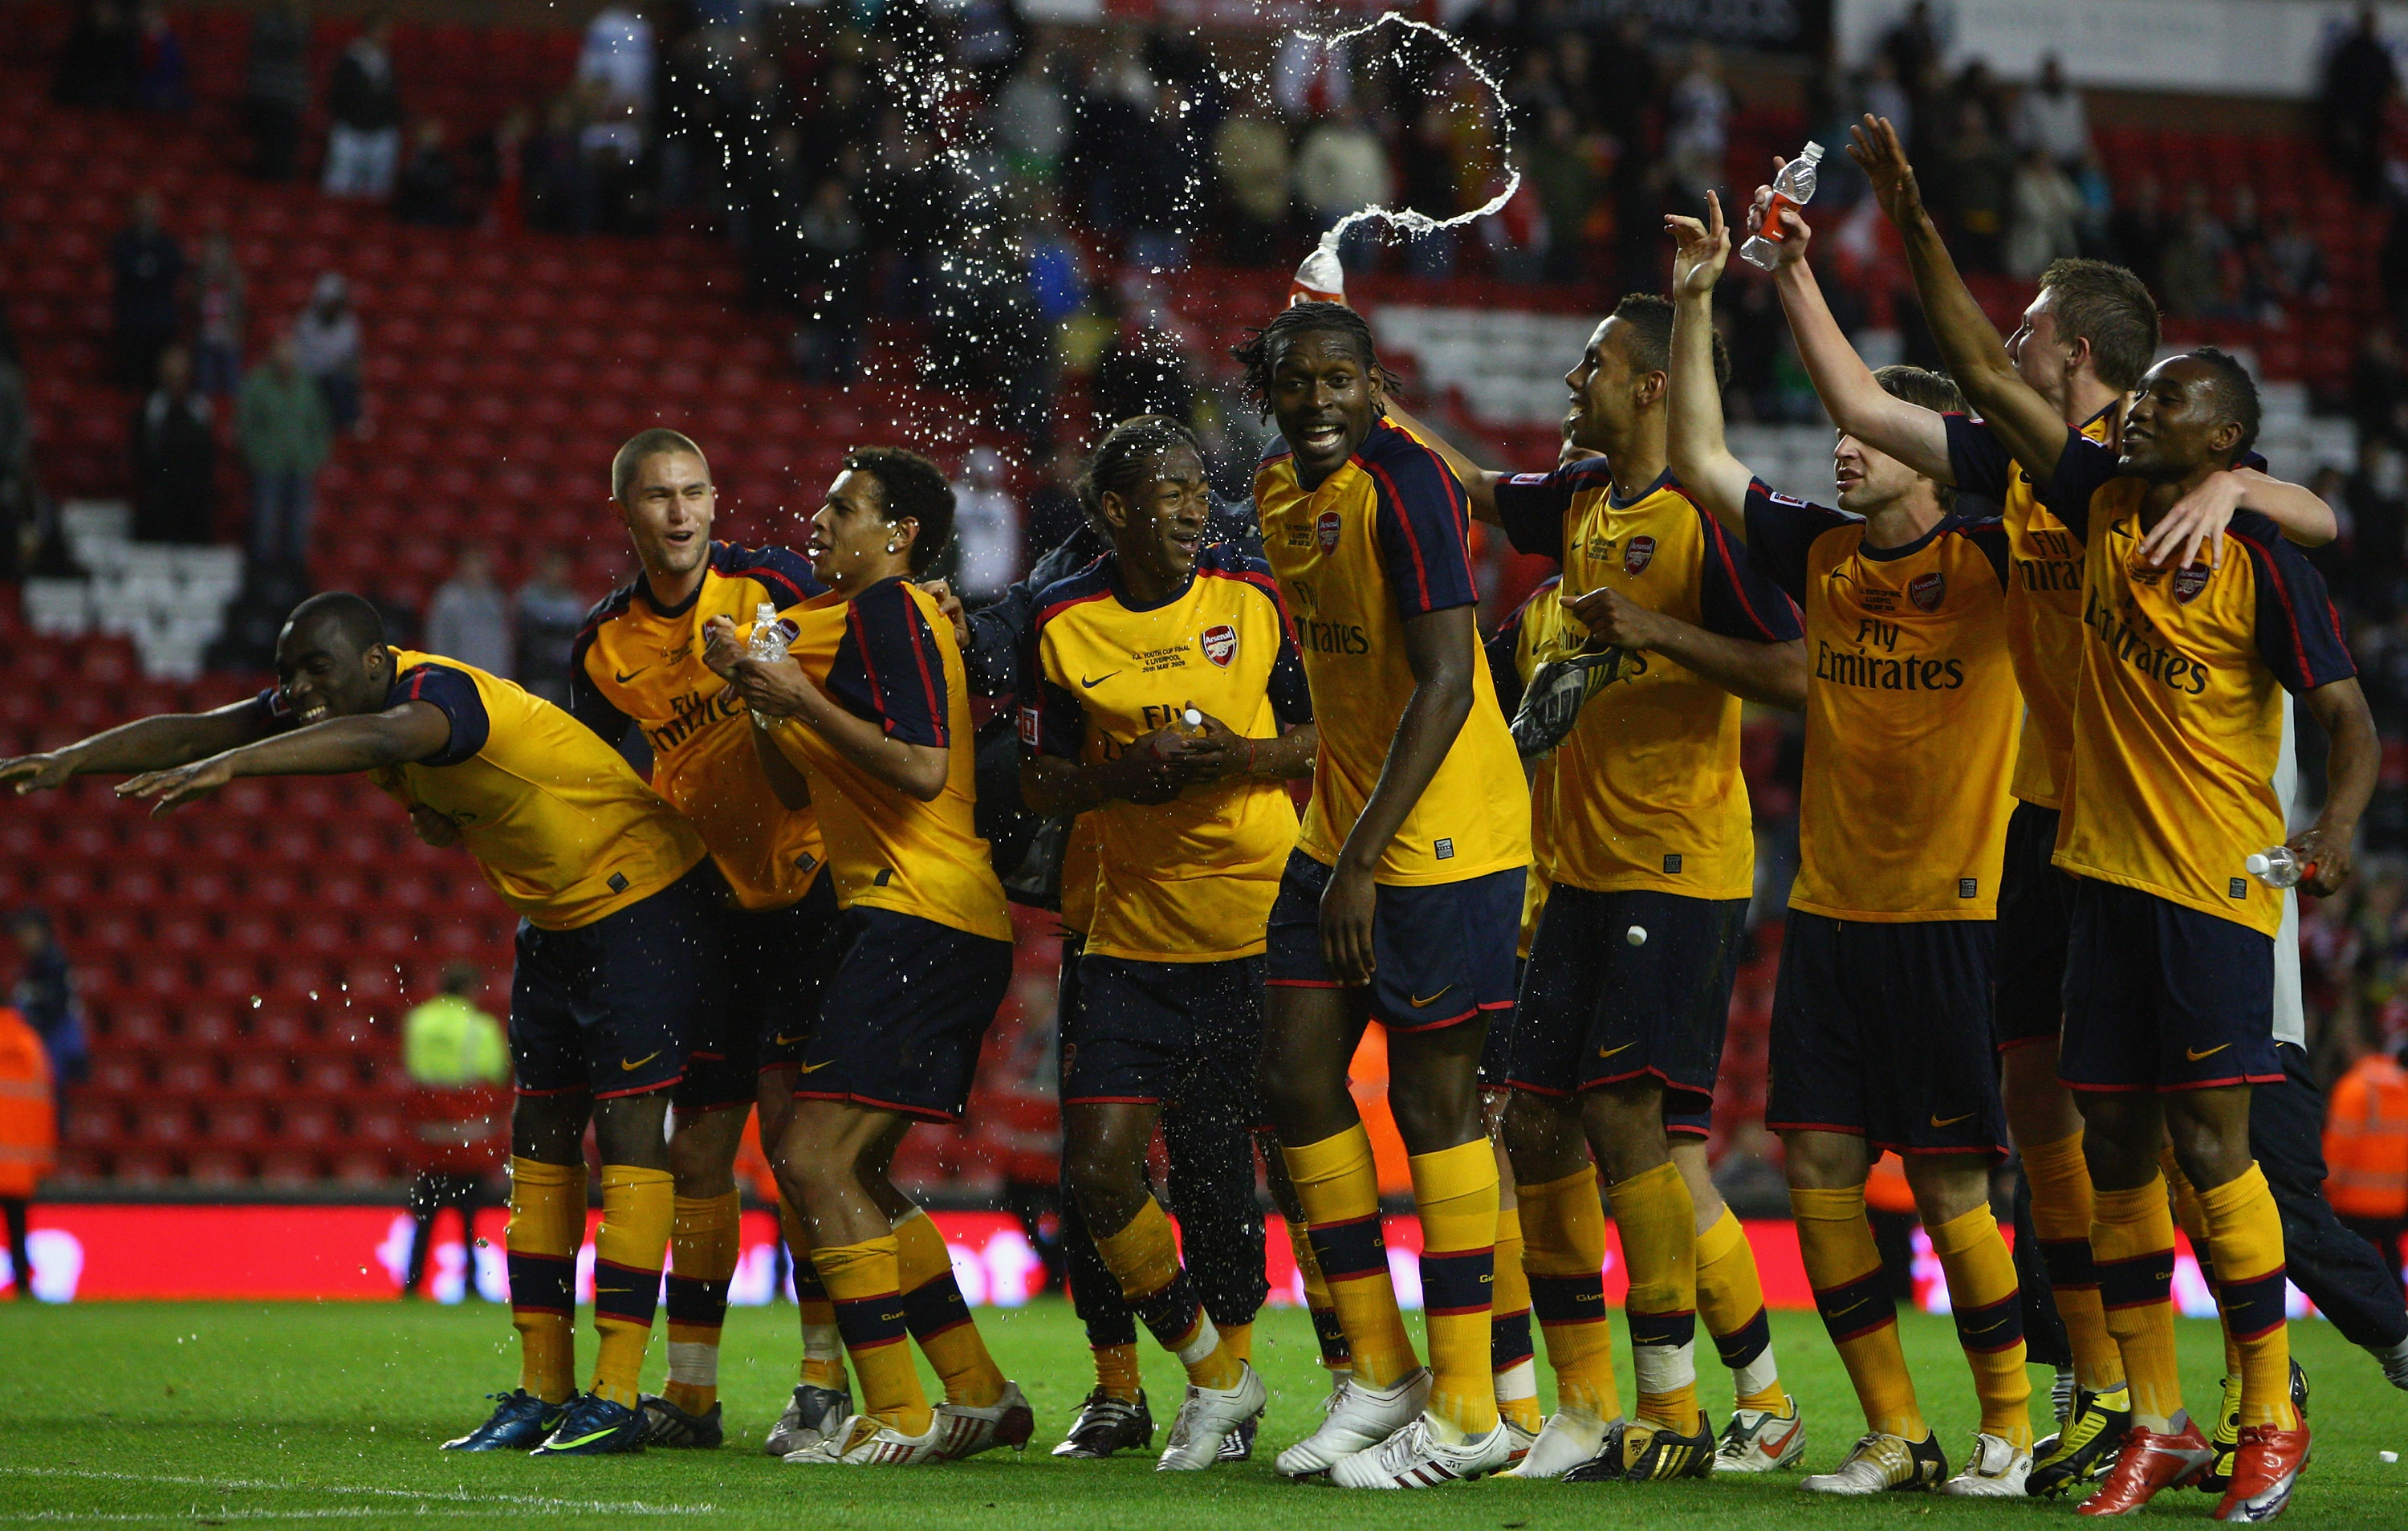 LIVERPOOL, ENGLAND - MAY 26:  The Arsenal team celebrate winning the FA Youth Cup during the second leg of the FA Youth Cup final sponsored by E.ON, between Liverpool and Arsenal at Anfield on May 26, 2009 in Liverpool, England.  (Photo by Jamie McDonald/